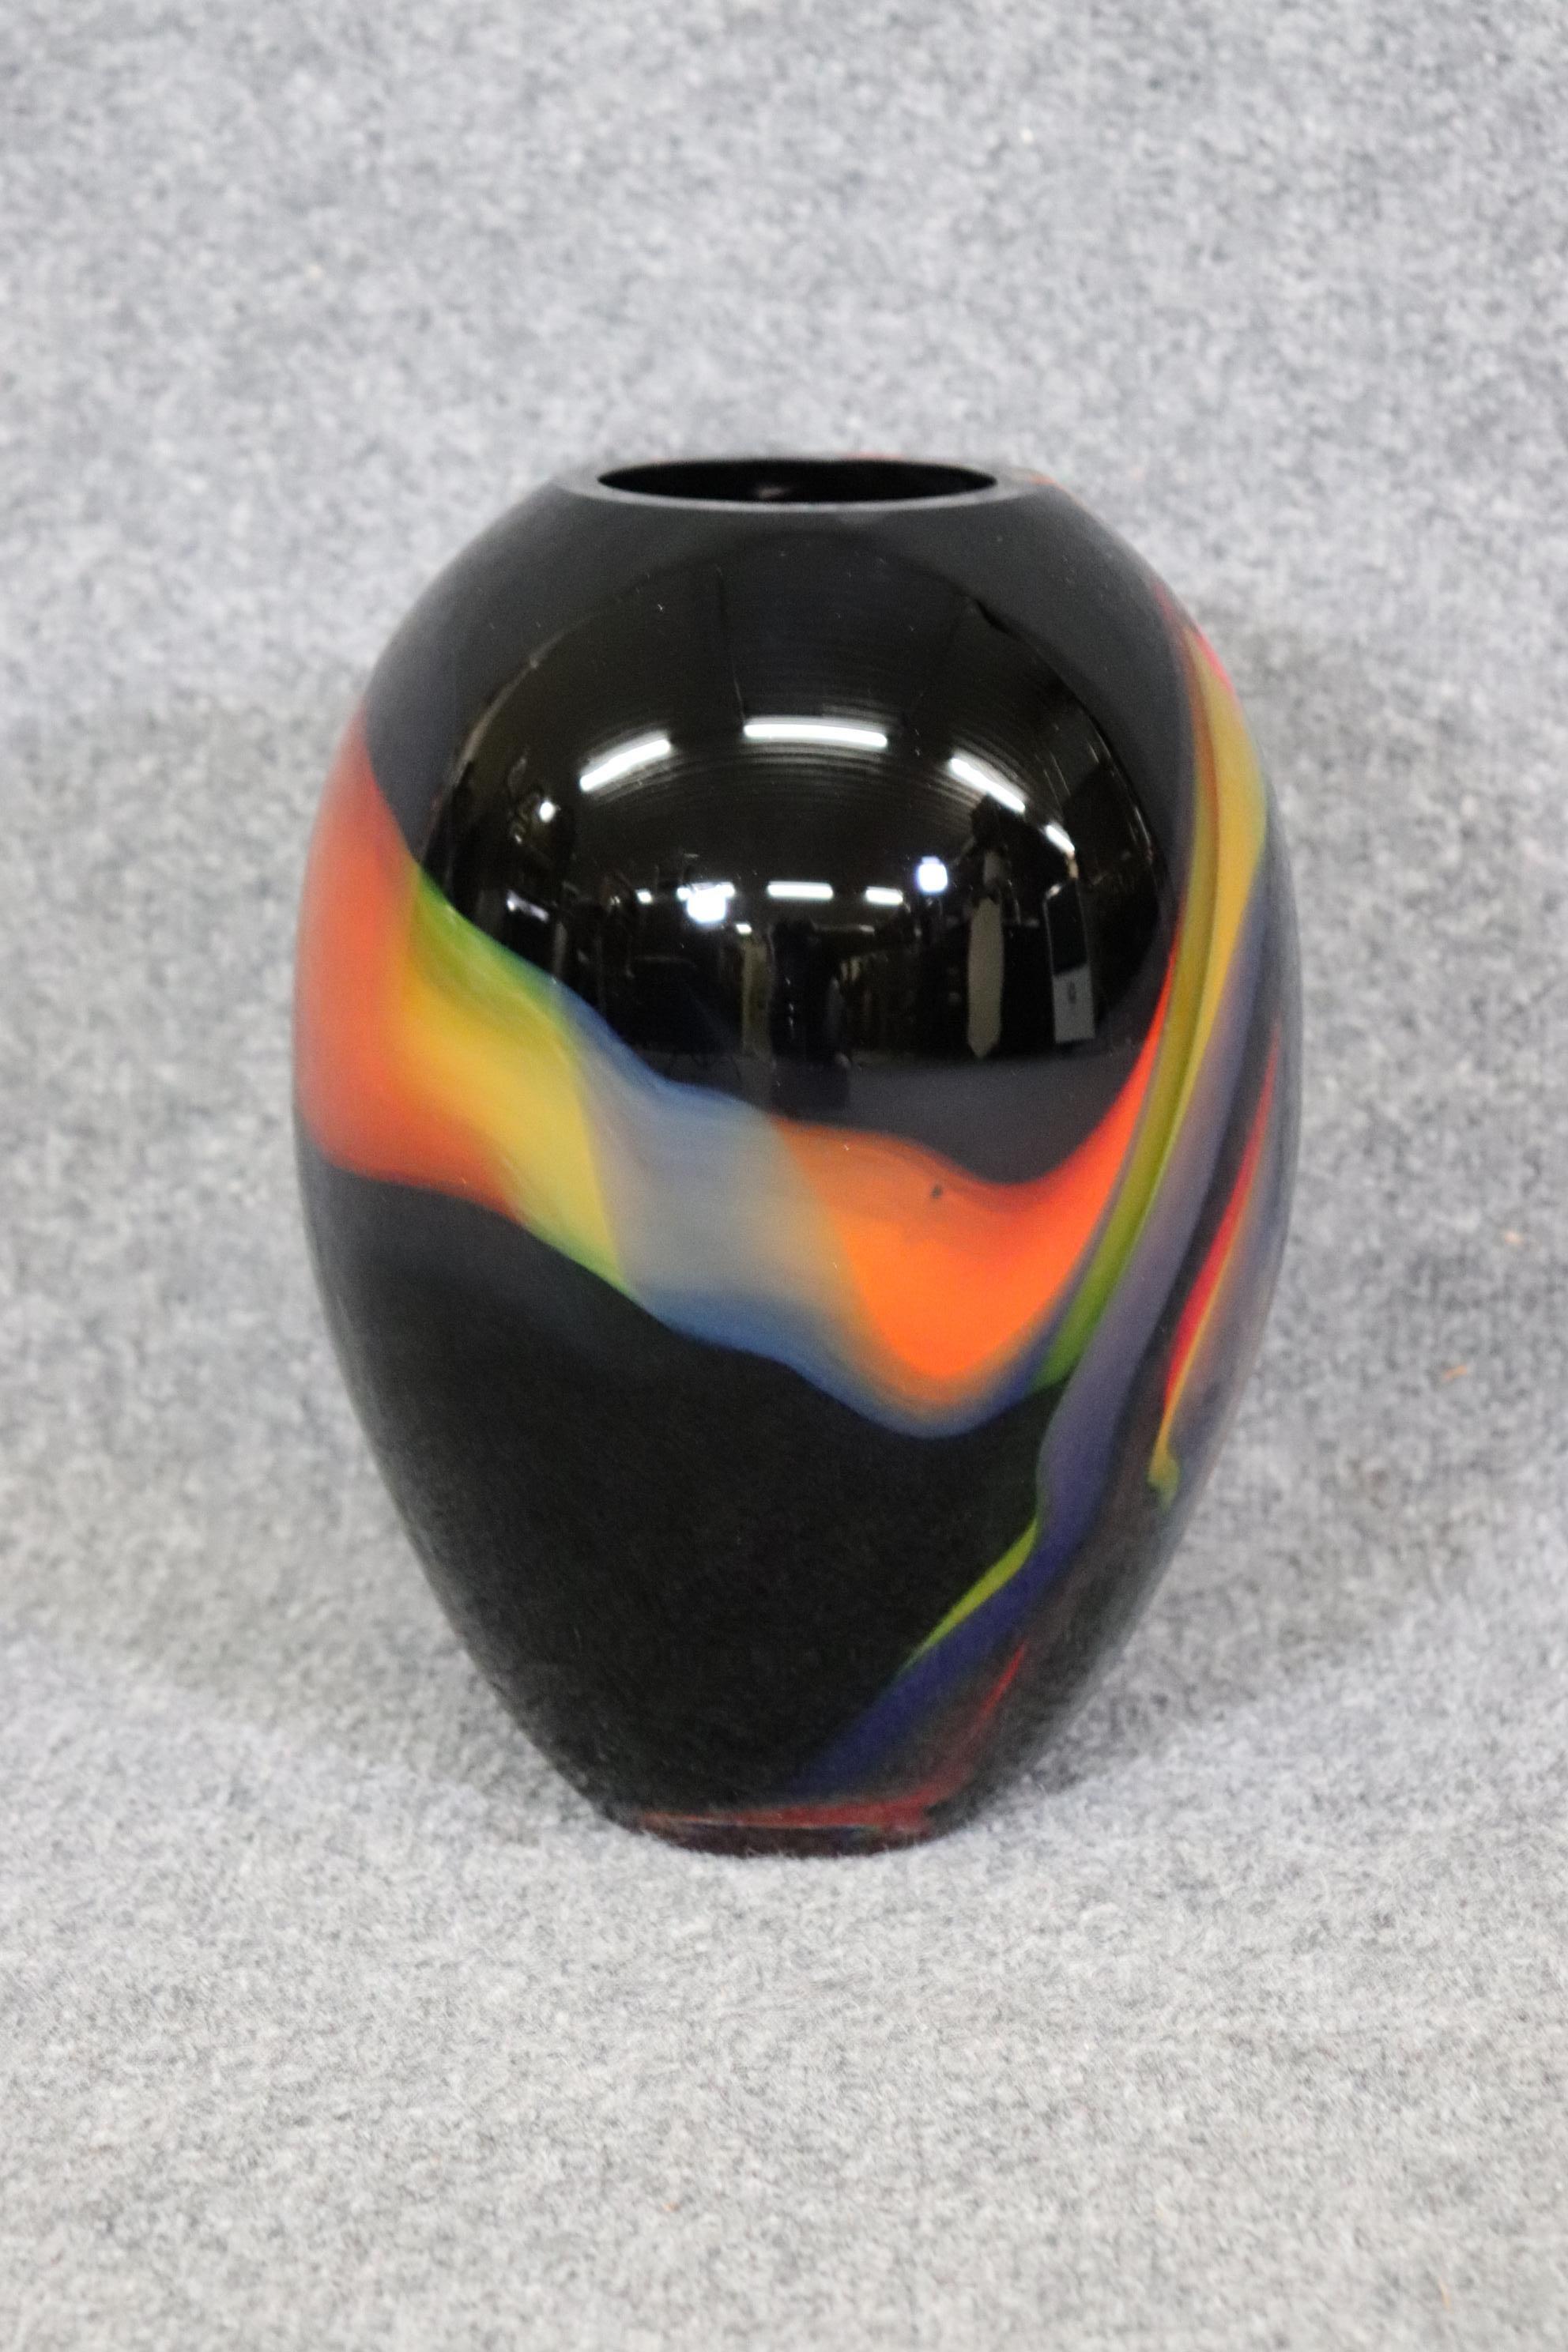 Dimensions: Height: 11 in Width: 7 3/4 in Depth: 7 3/4 in 
This Mid Century Deco art glass vase was made in the manner of John Dunand and is made of the highest quality. If you look at the photos provided, you will see the flowing design in mid